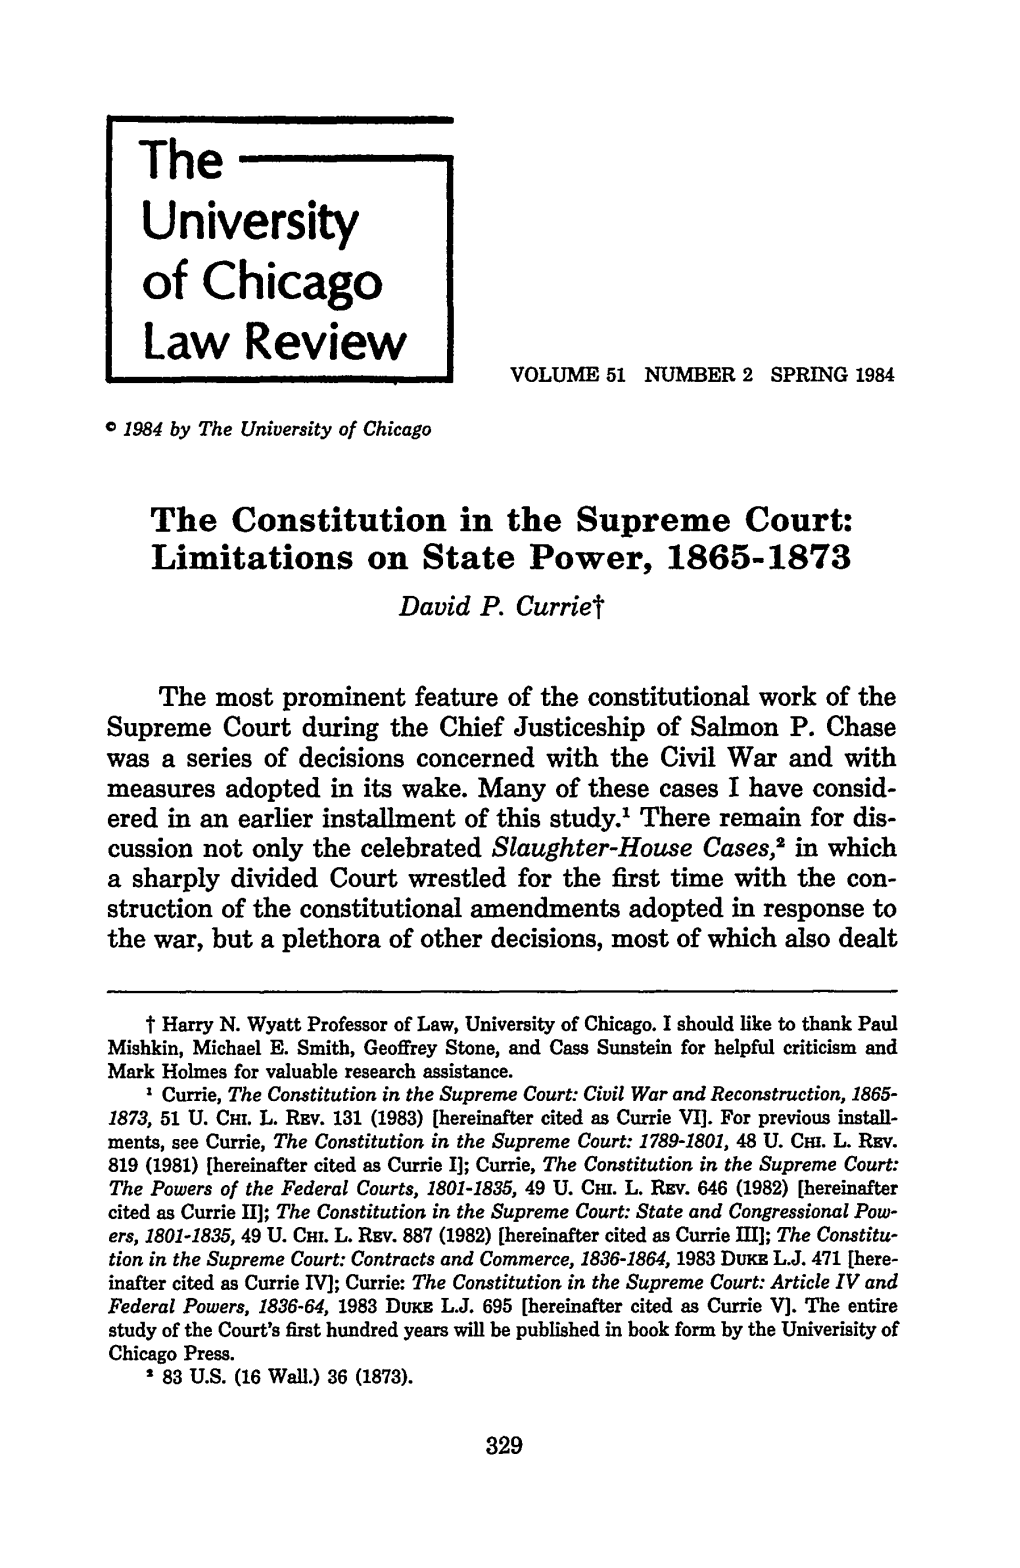 The Constitution in the Supreme Court: Limitations on State Power, 1865-1873 David P